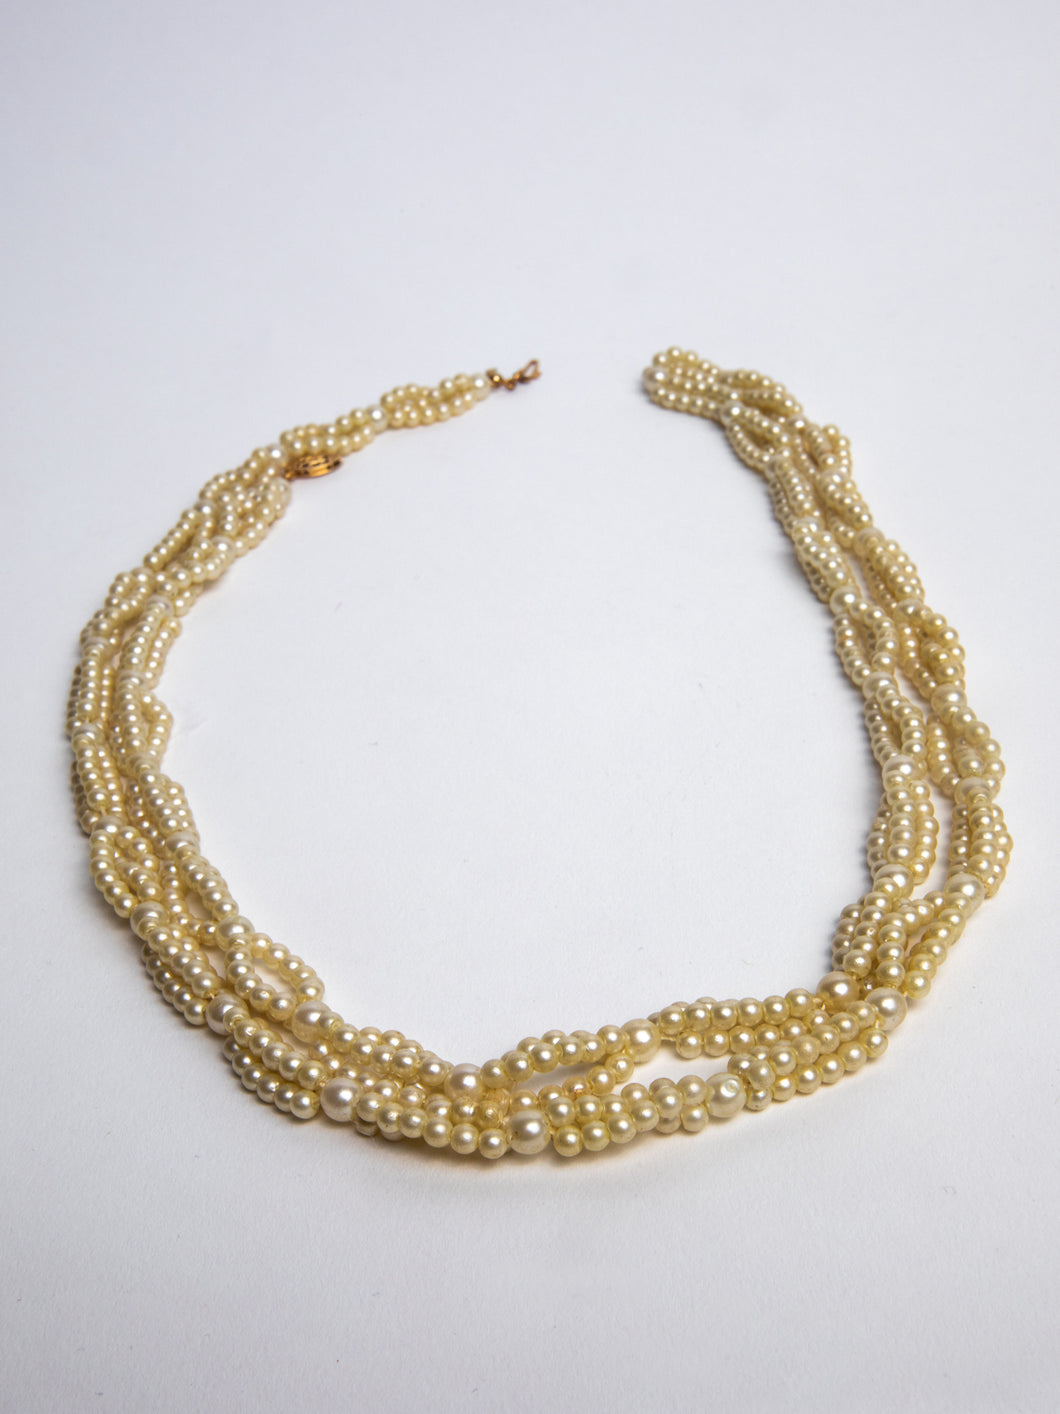 Vintage Costume Pearl Necklace